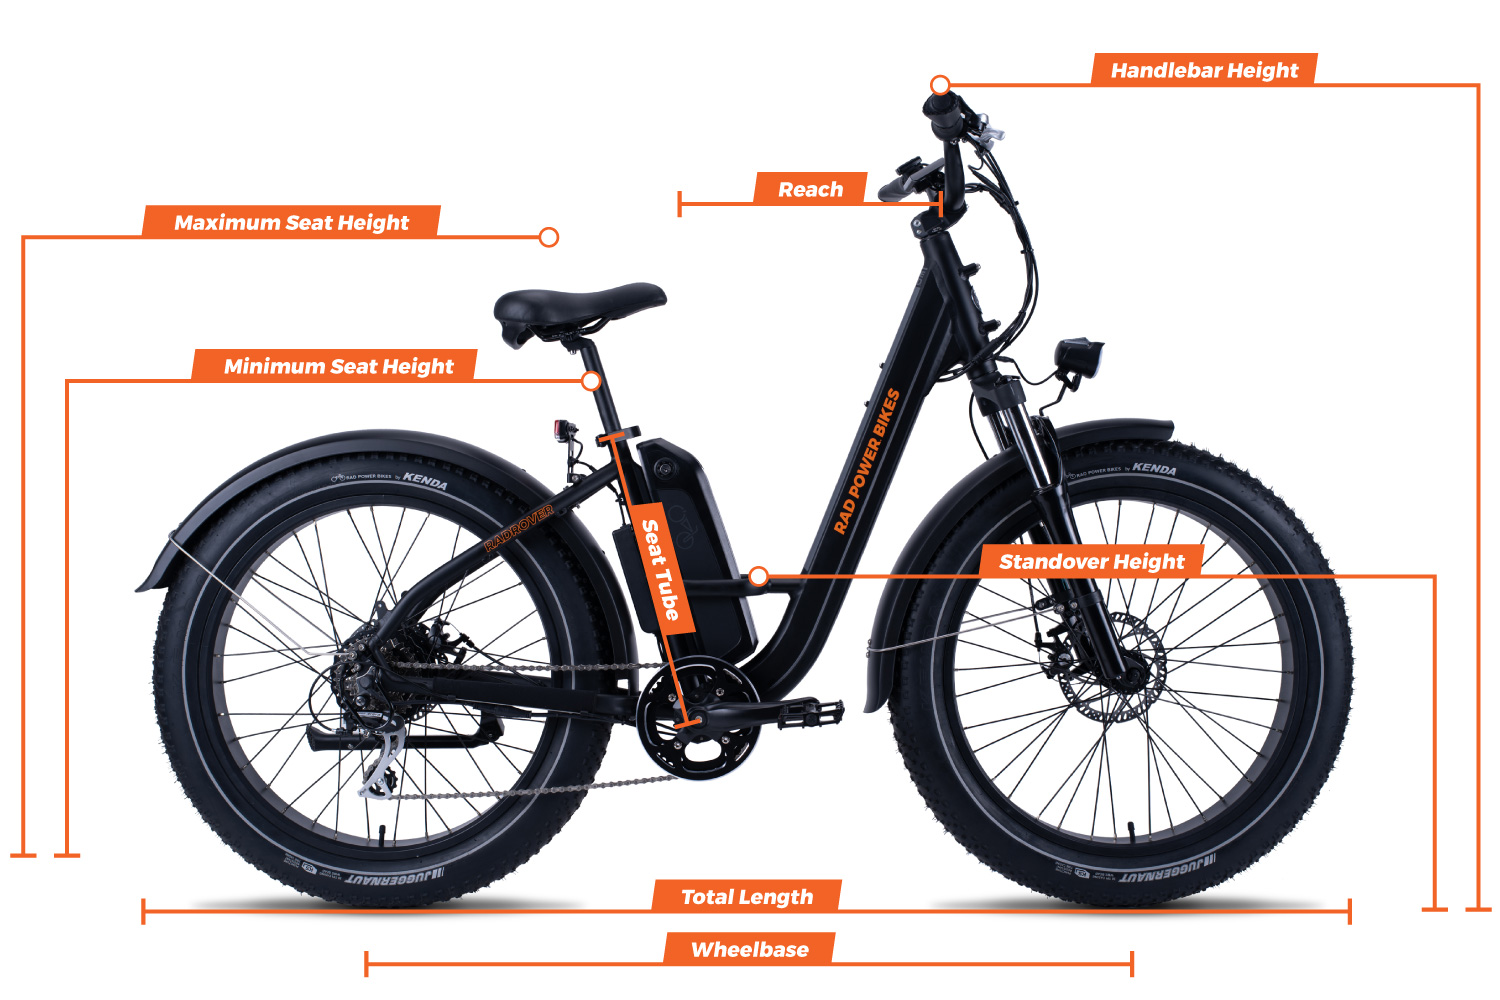 Geometry chart for the RadRover Step-Thru Electric Fat Bike Version 1